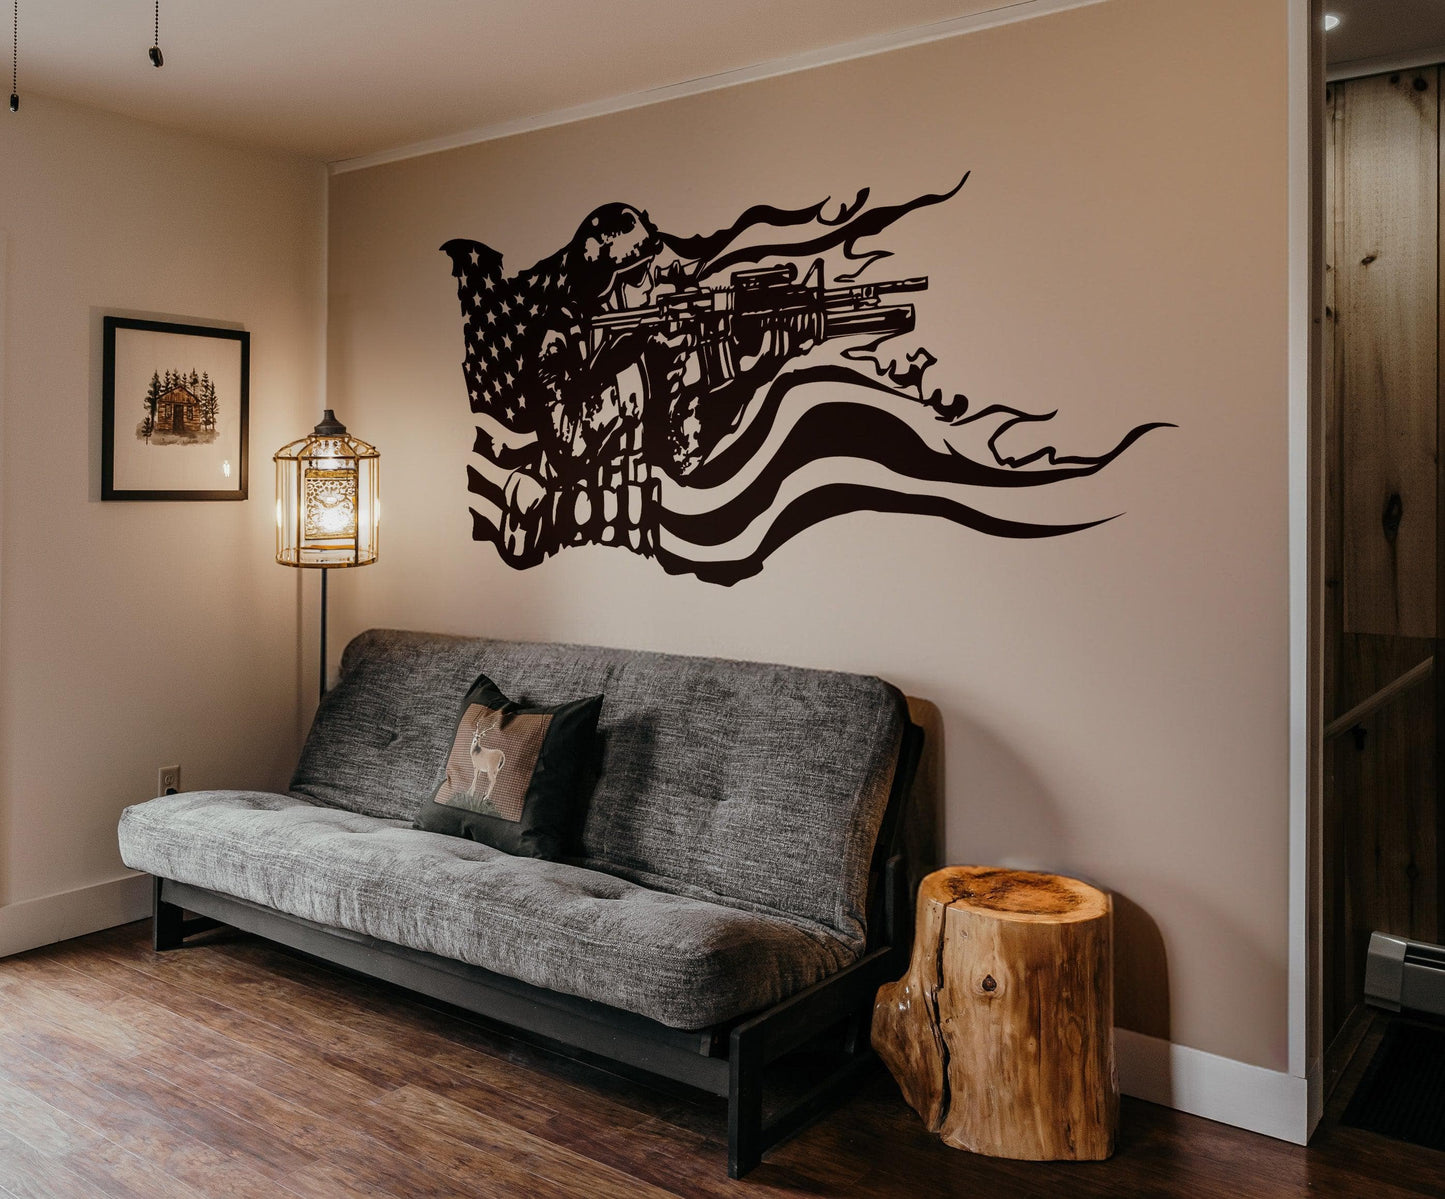 A black decal on a white wall showing a soldier holding a gun and the American flag behind it. Underneath it is a black couch.